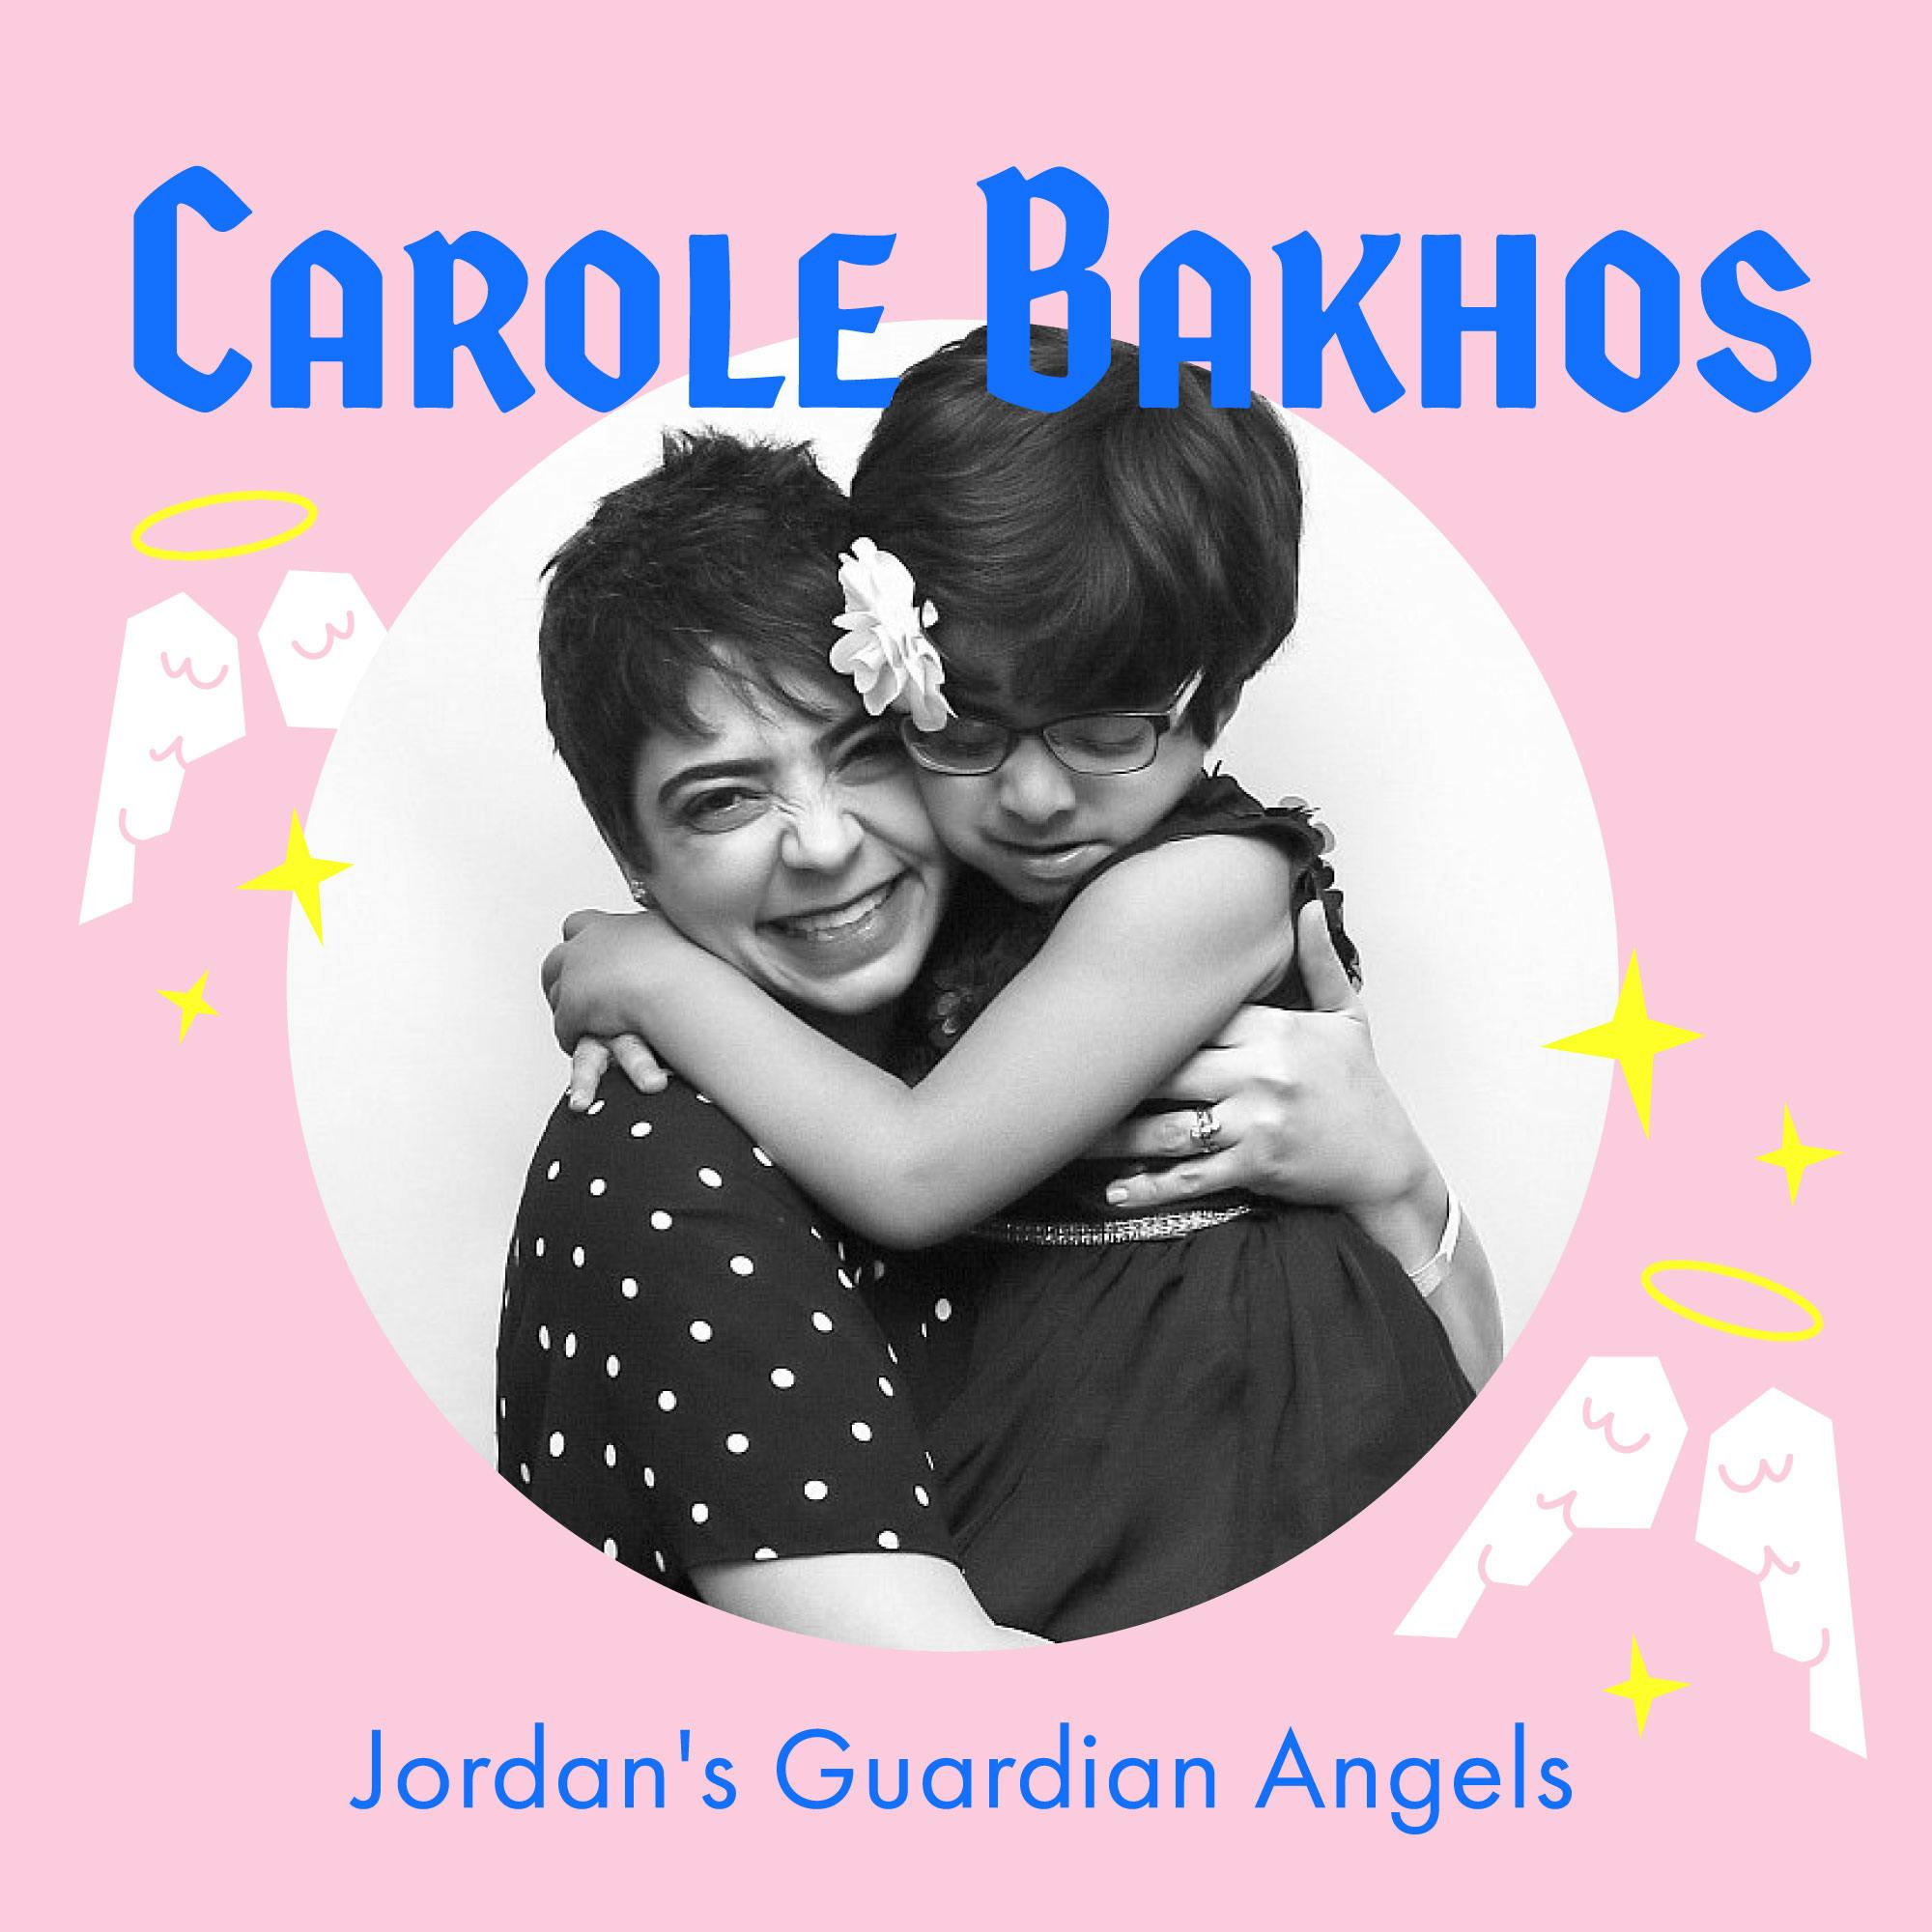 A Mother's Story of Finding Your People, Accepting a Diagnosis and Loving Her Kid for Exactly Who She is with Jordan's Guardian Angels Mom – Carole Bakhos